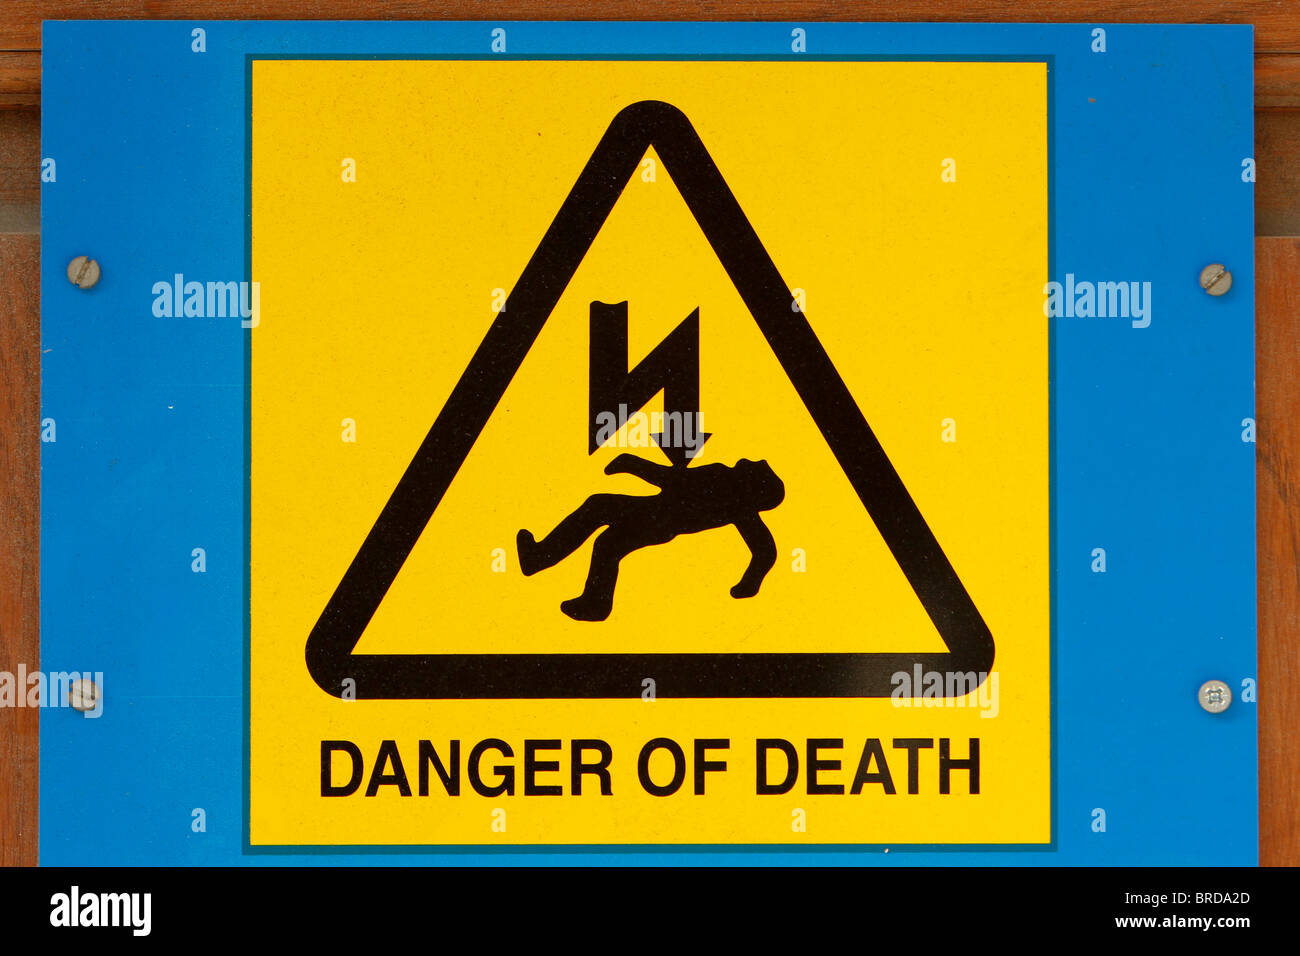 A danger of death sign Stock Photo